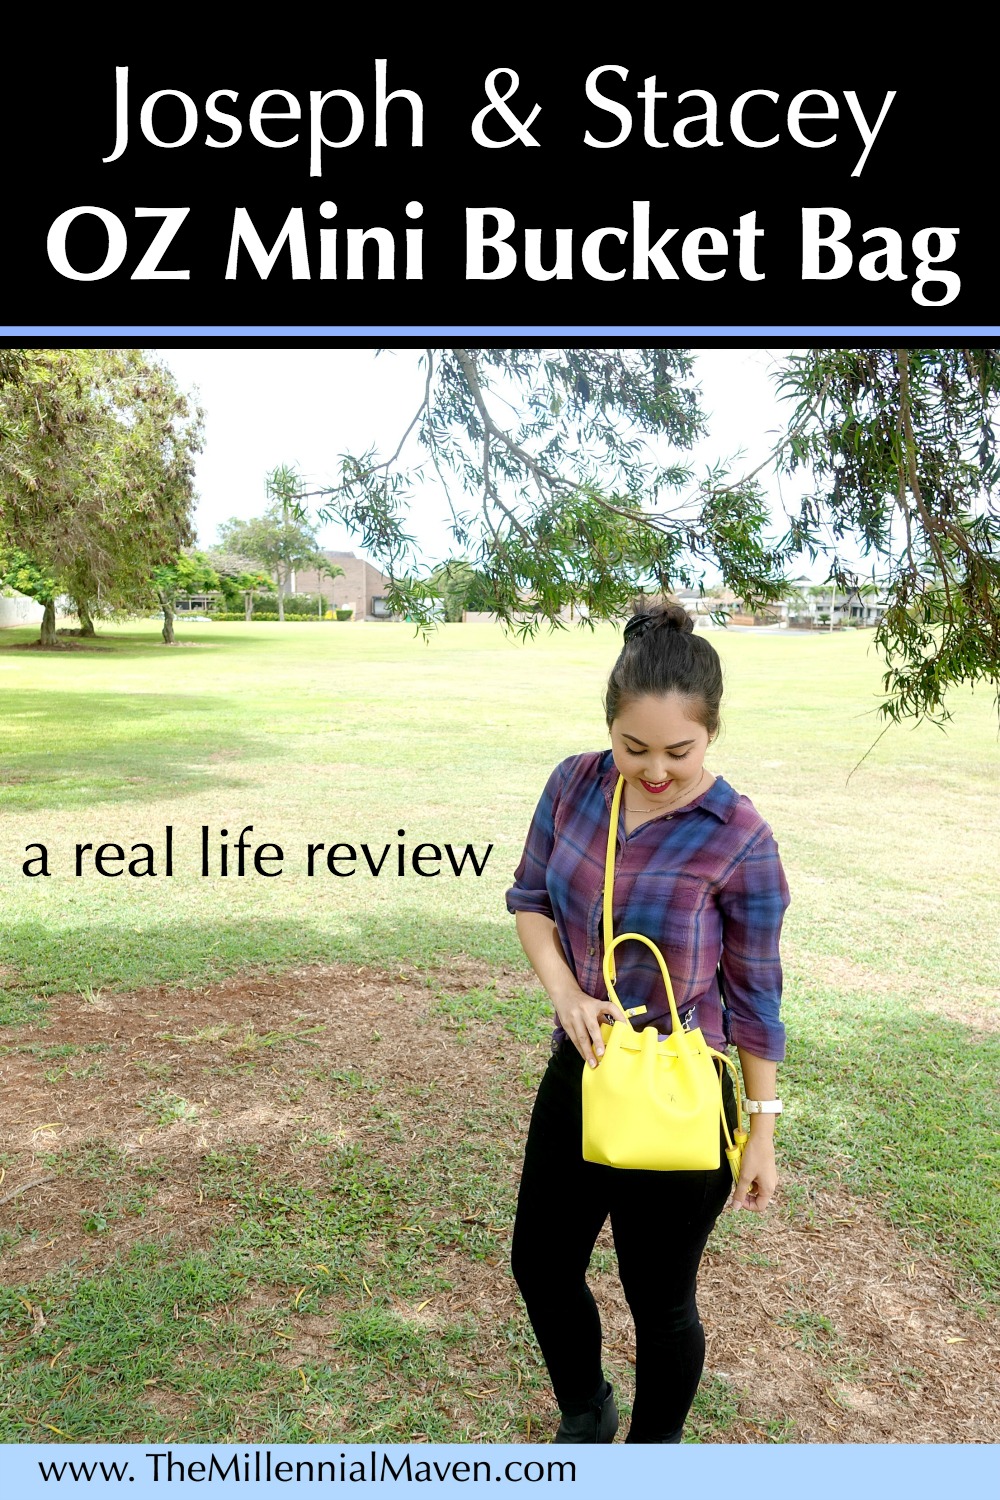 Joseph & Stacey OZ Mini Bucket Bag -- a real life review.